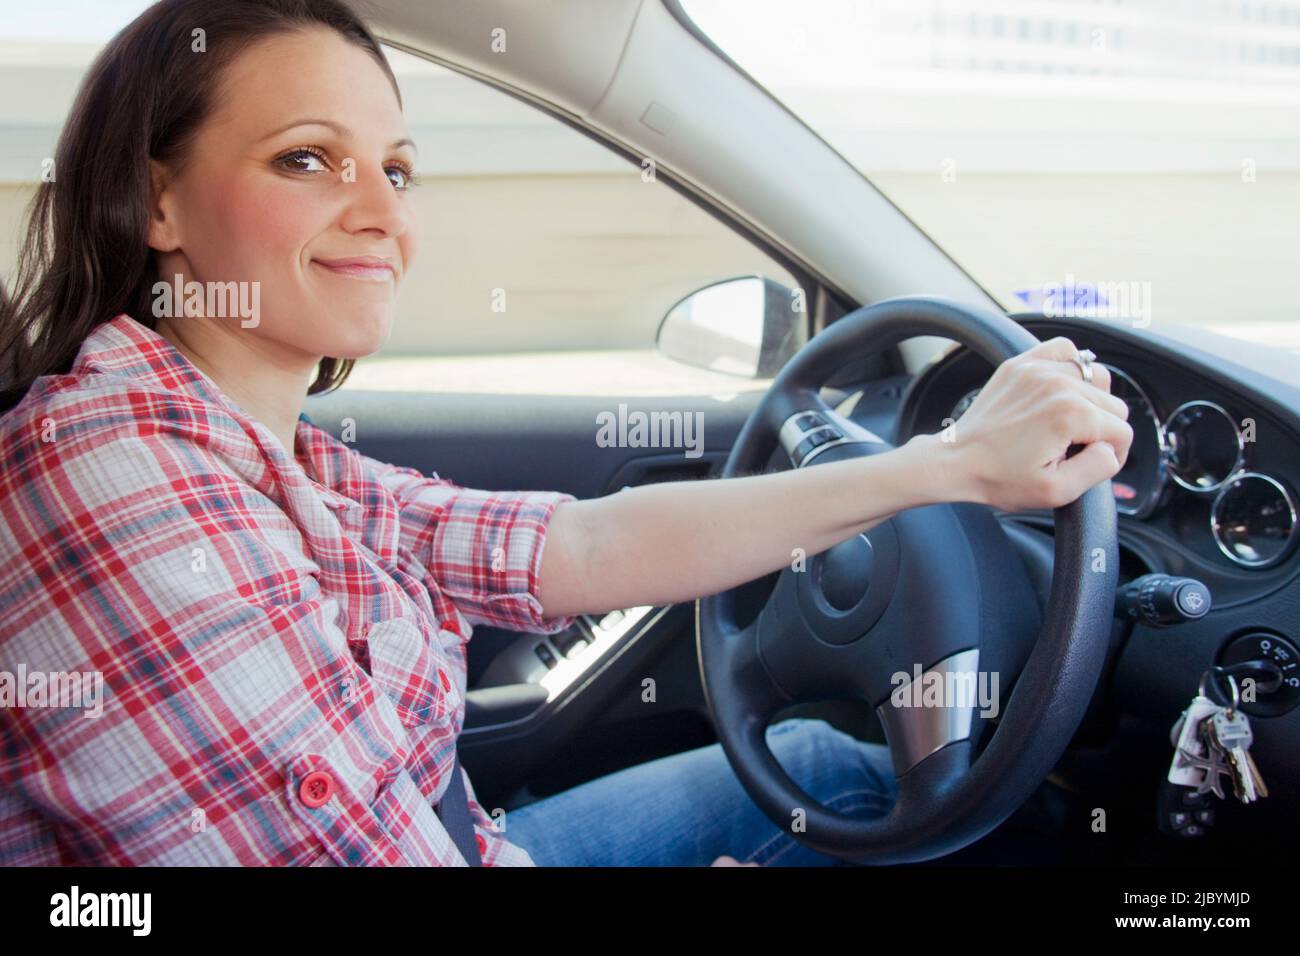 Smiling woman driving car Stock Photo